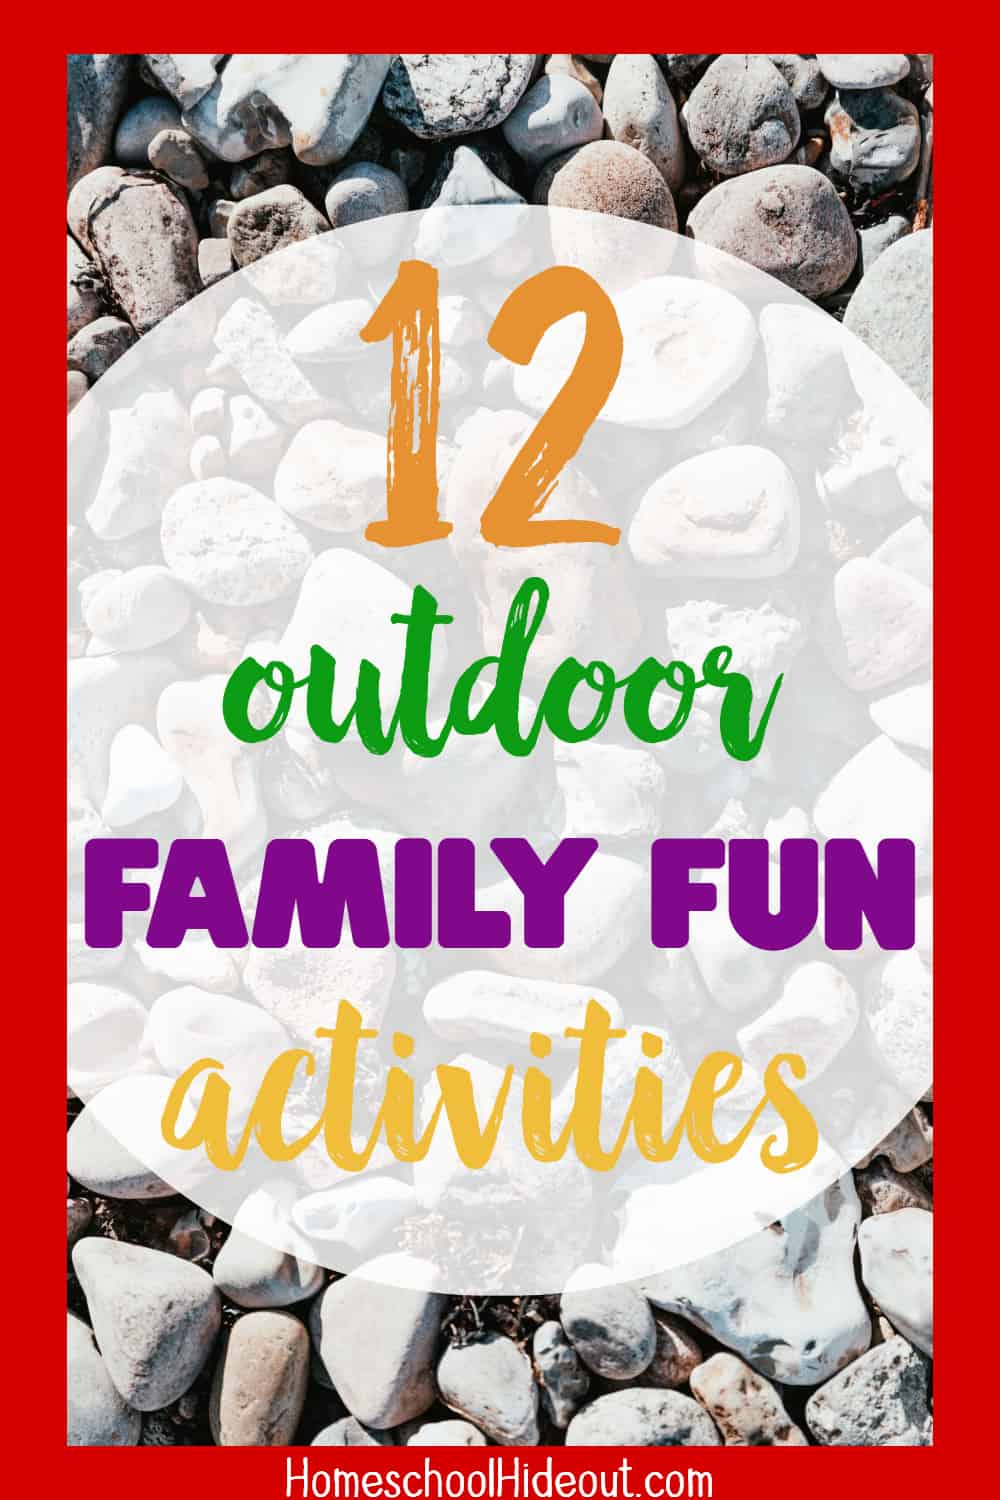 This list of family fun activities is a great way to get some exercise and make memories, while having fun. #6 is my favorite!!!